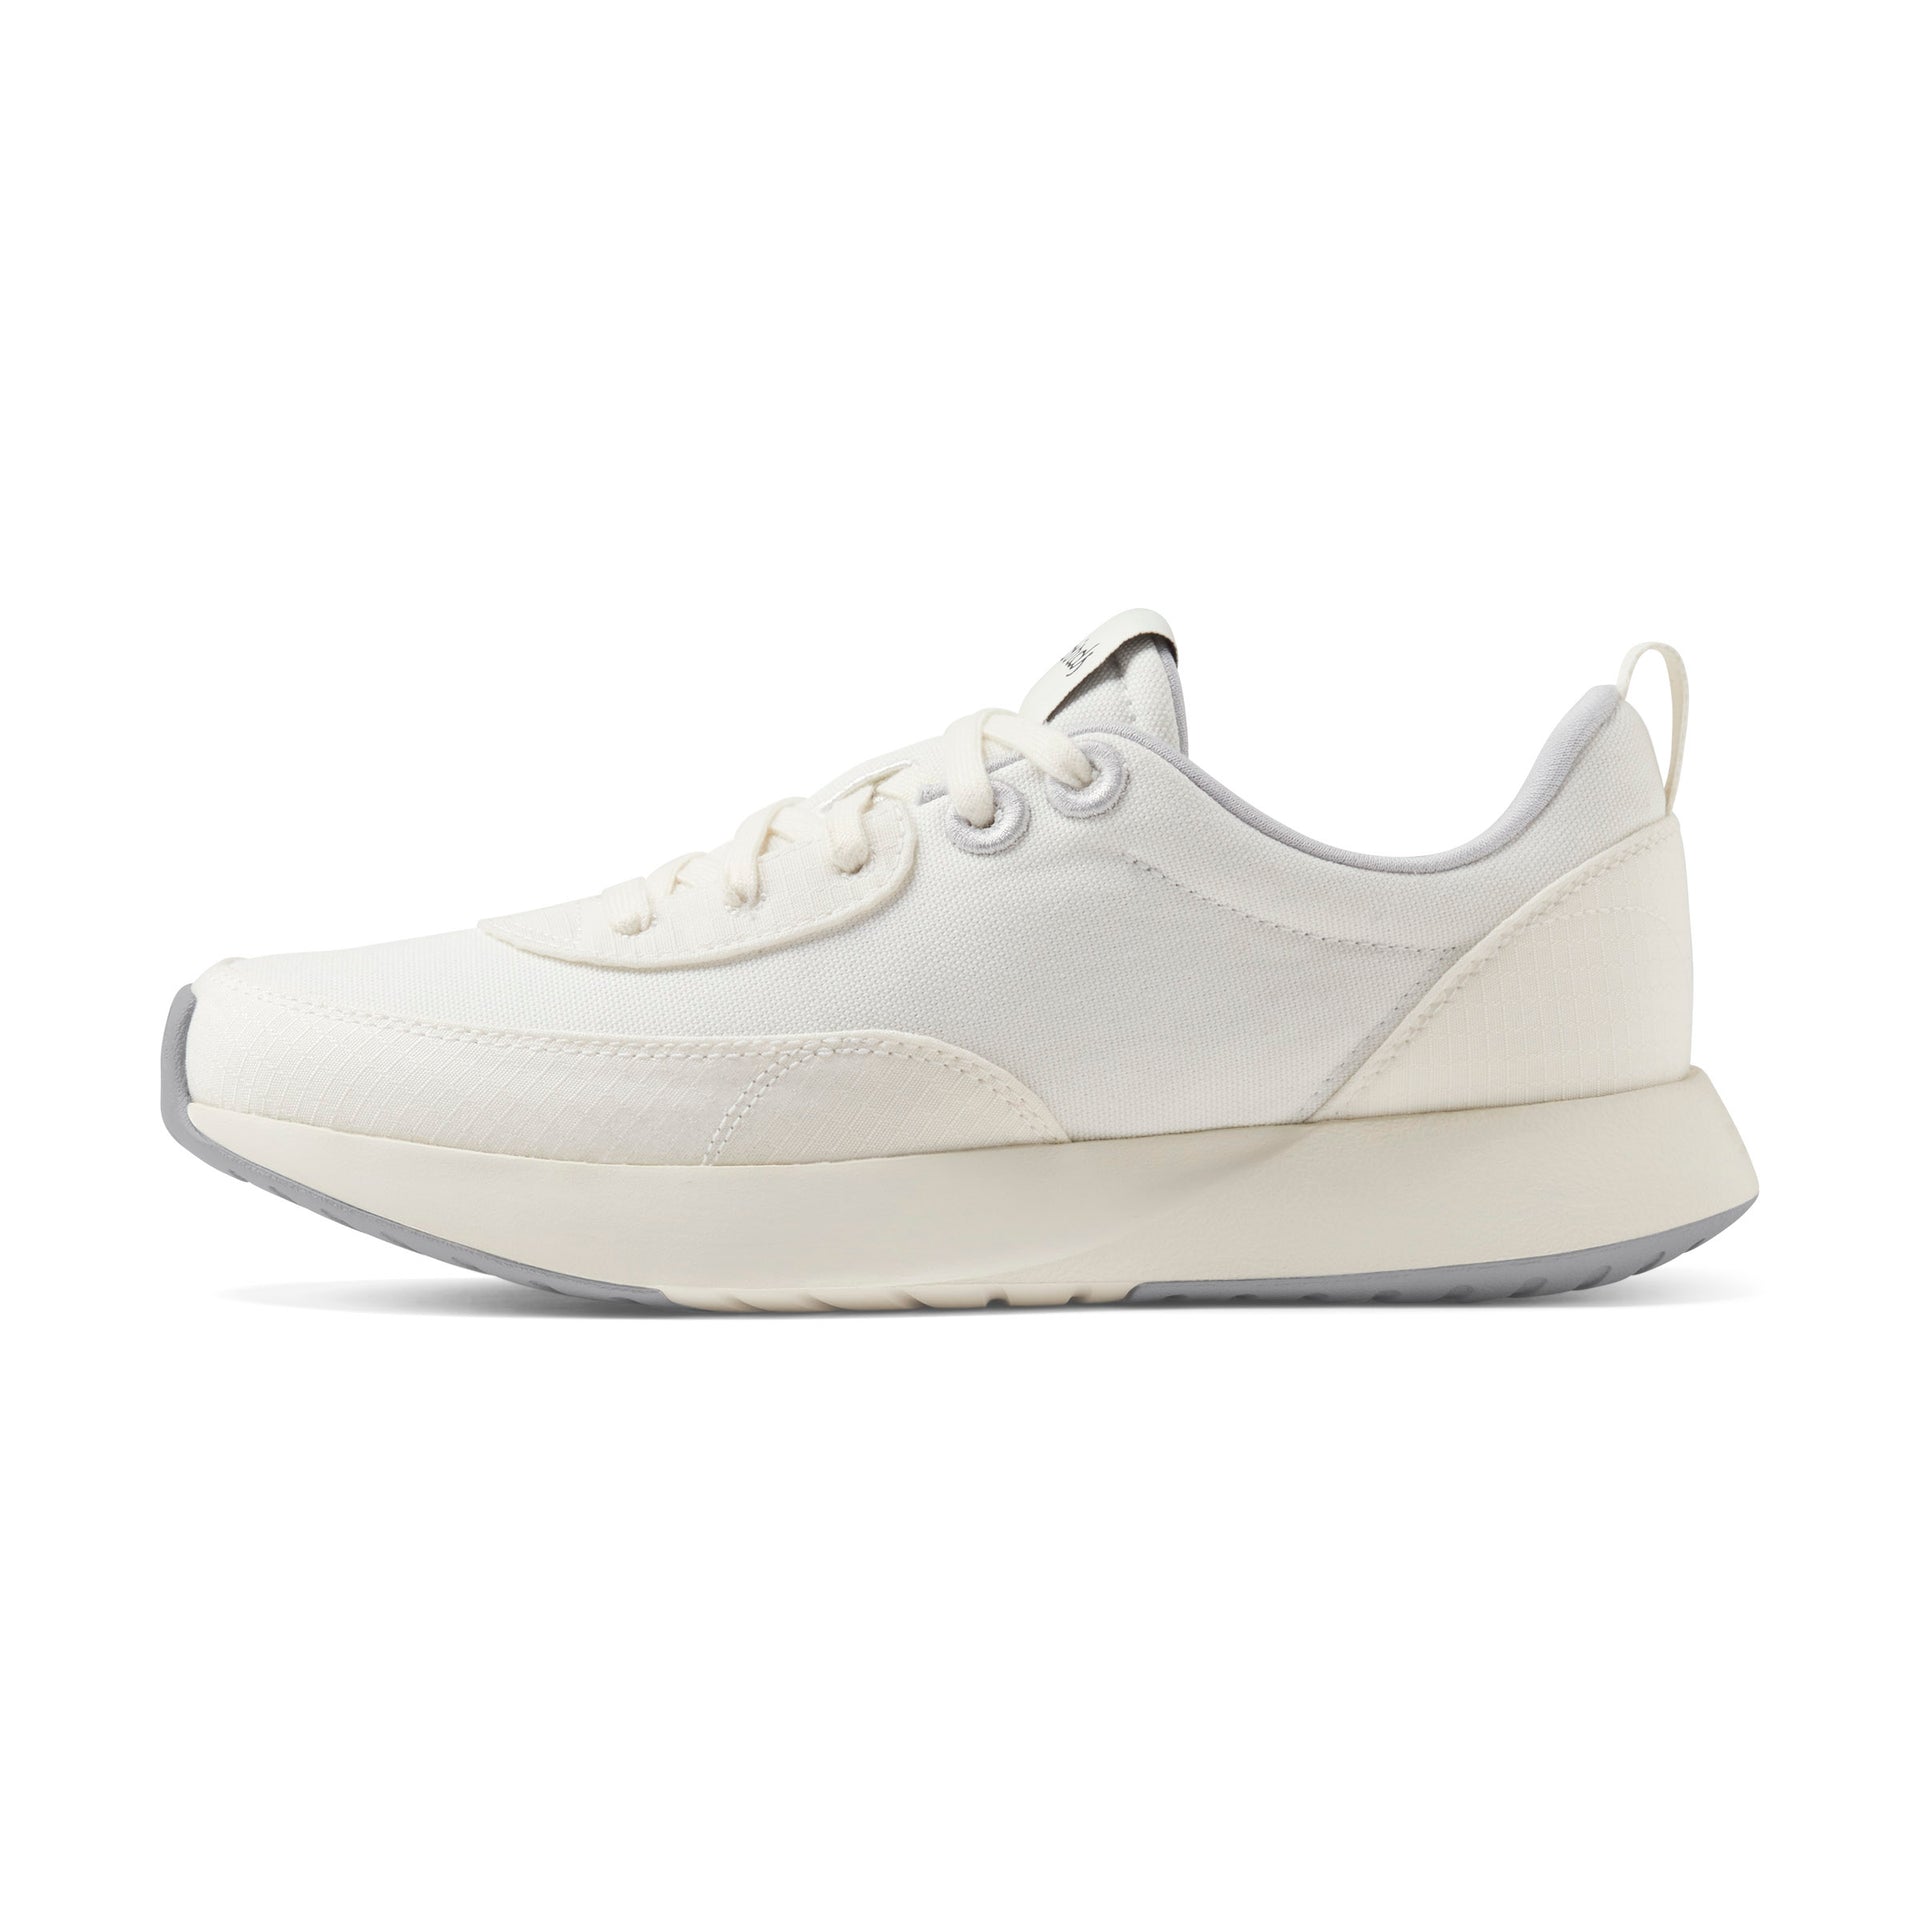 Women's Couriers - Blizzard / Light Grey (Natural White)